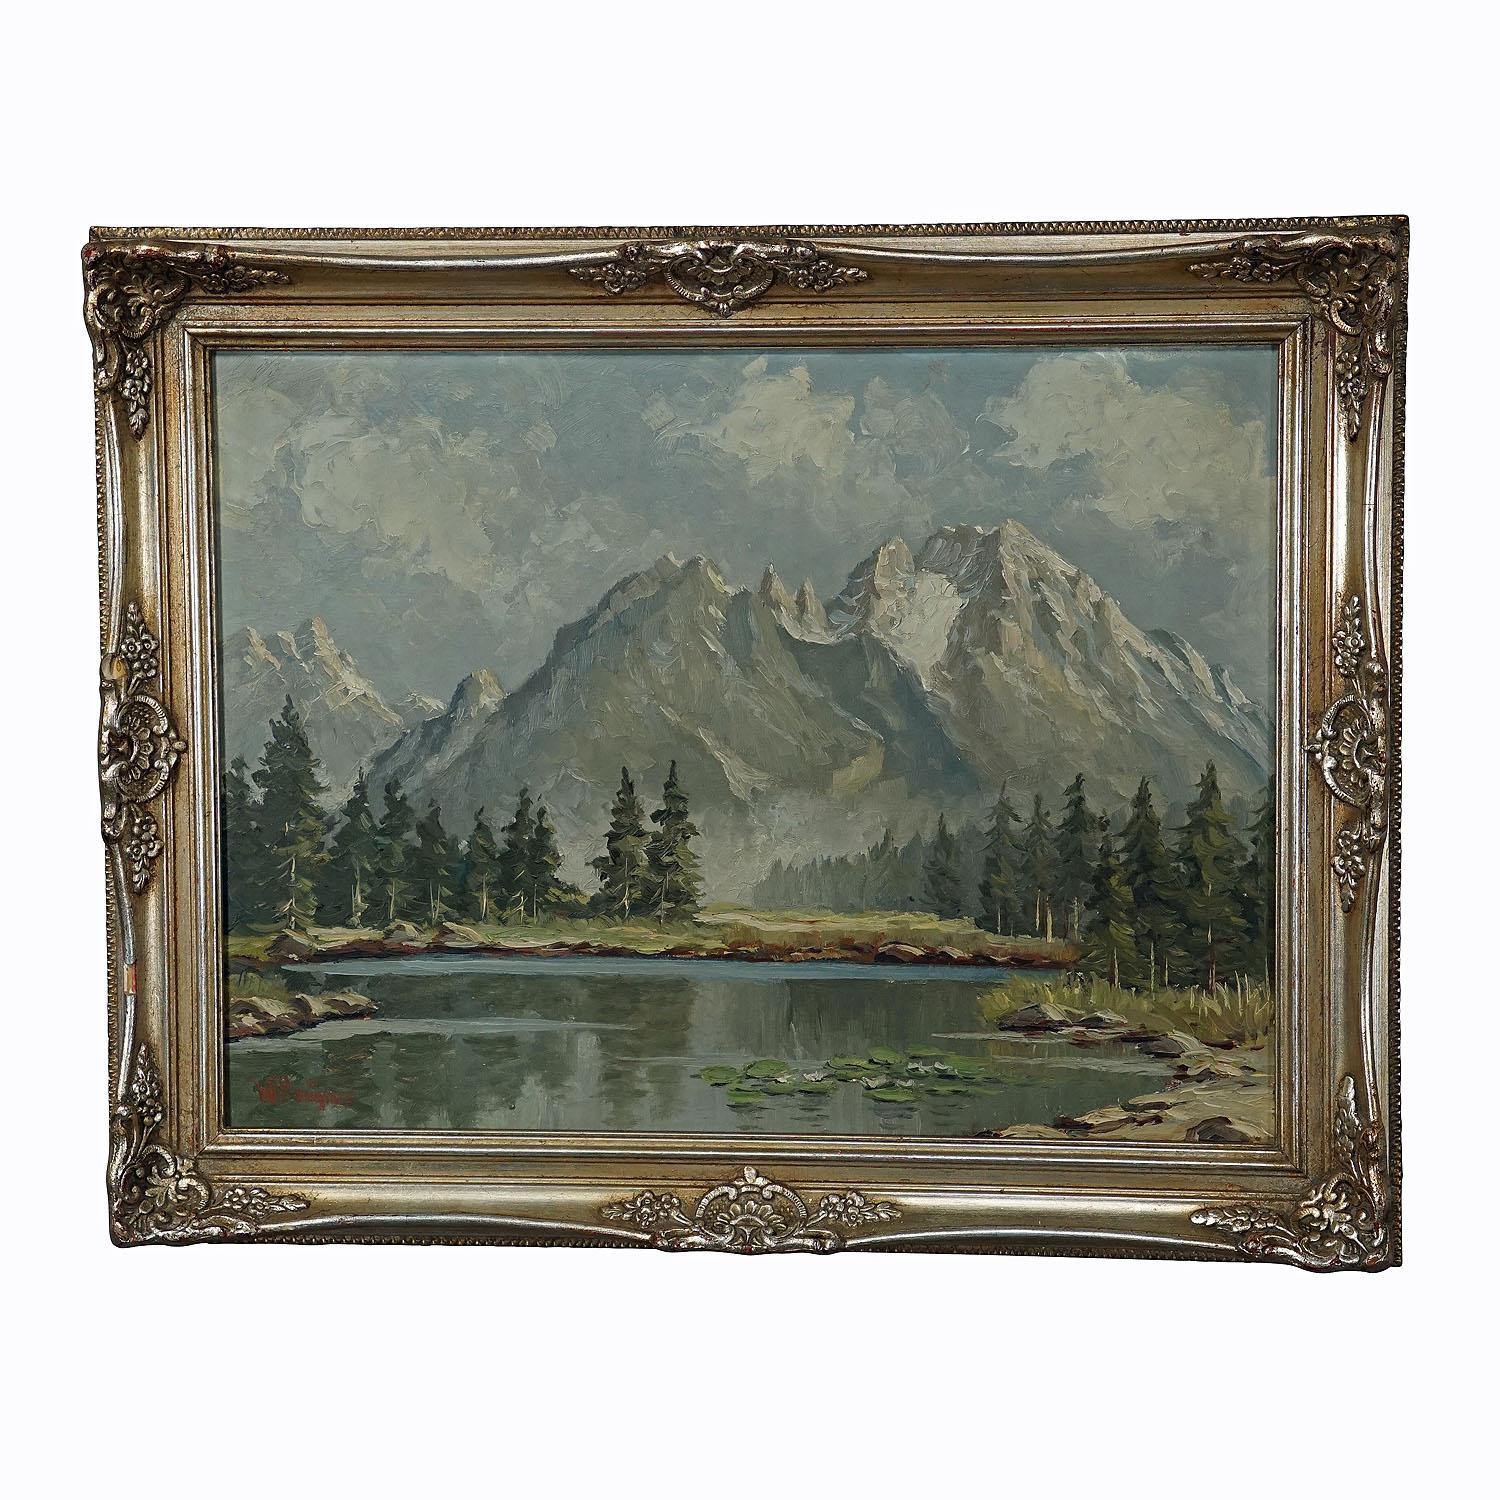 W. Kruegner- summerly high mountain landscape with alpine Lake and Watzmann.

An impressionistic oil painting depicting a high mountain landscape with mountain see in front of the Watzmann. Oil painting on board with pastell colors. Painted by W.